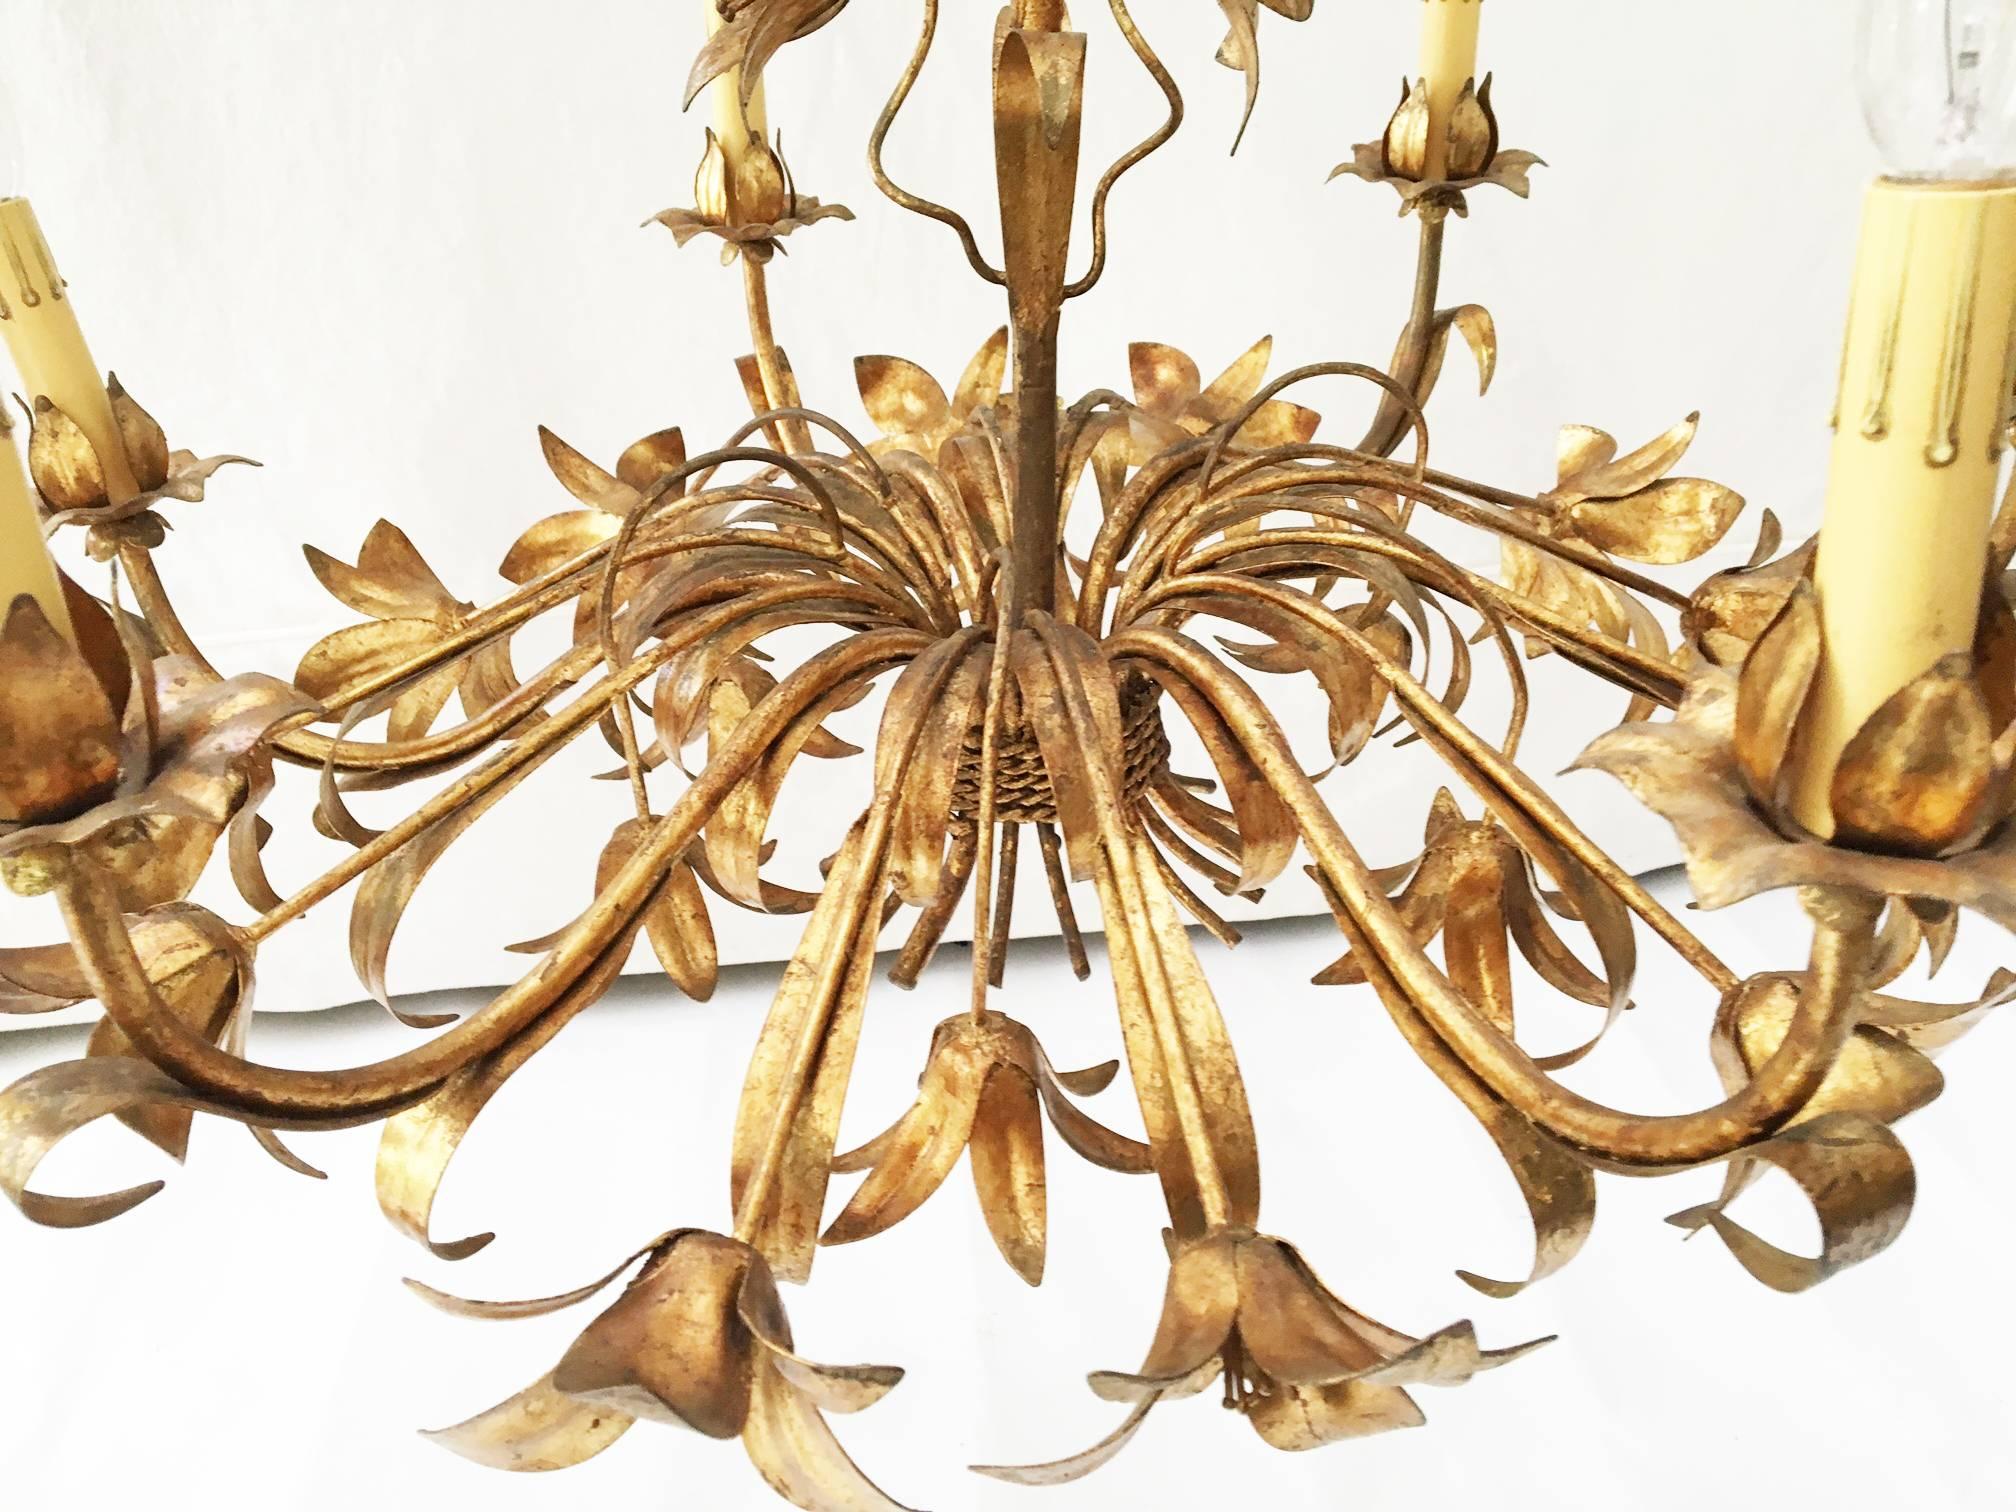 Beautiful Italian tole lily six-light chandelier in gold gilt. Unusual shape that adds a modern touch to a classic fixture. No markings.  Very good vintage condition with minor imperfections consistent with age.